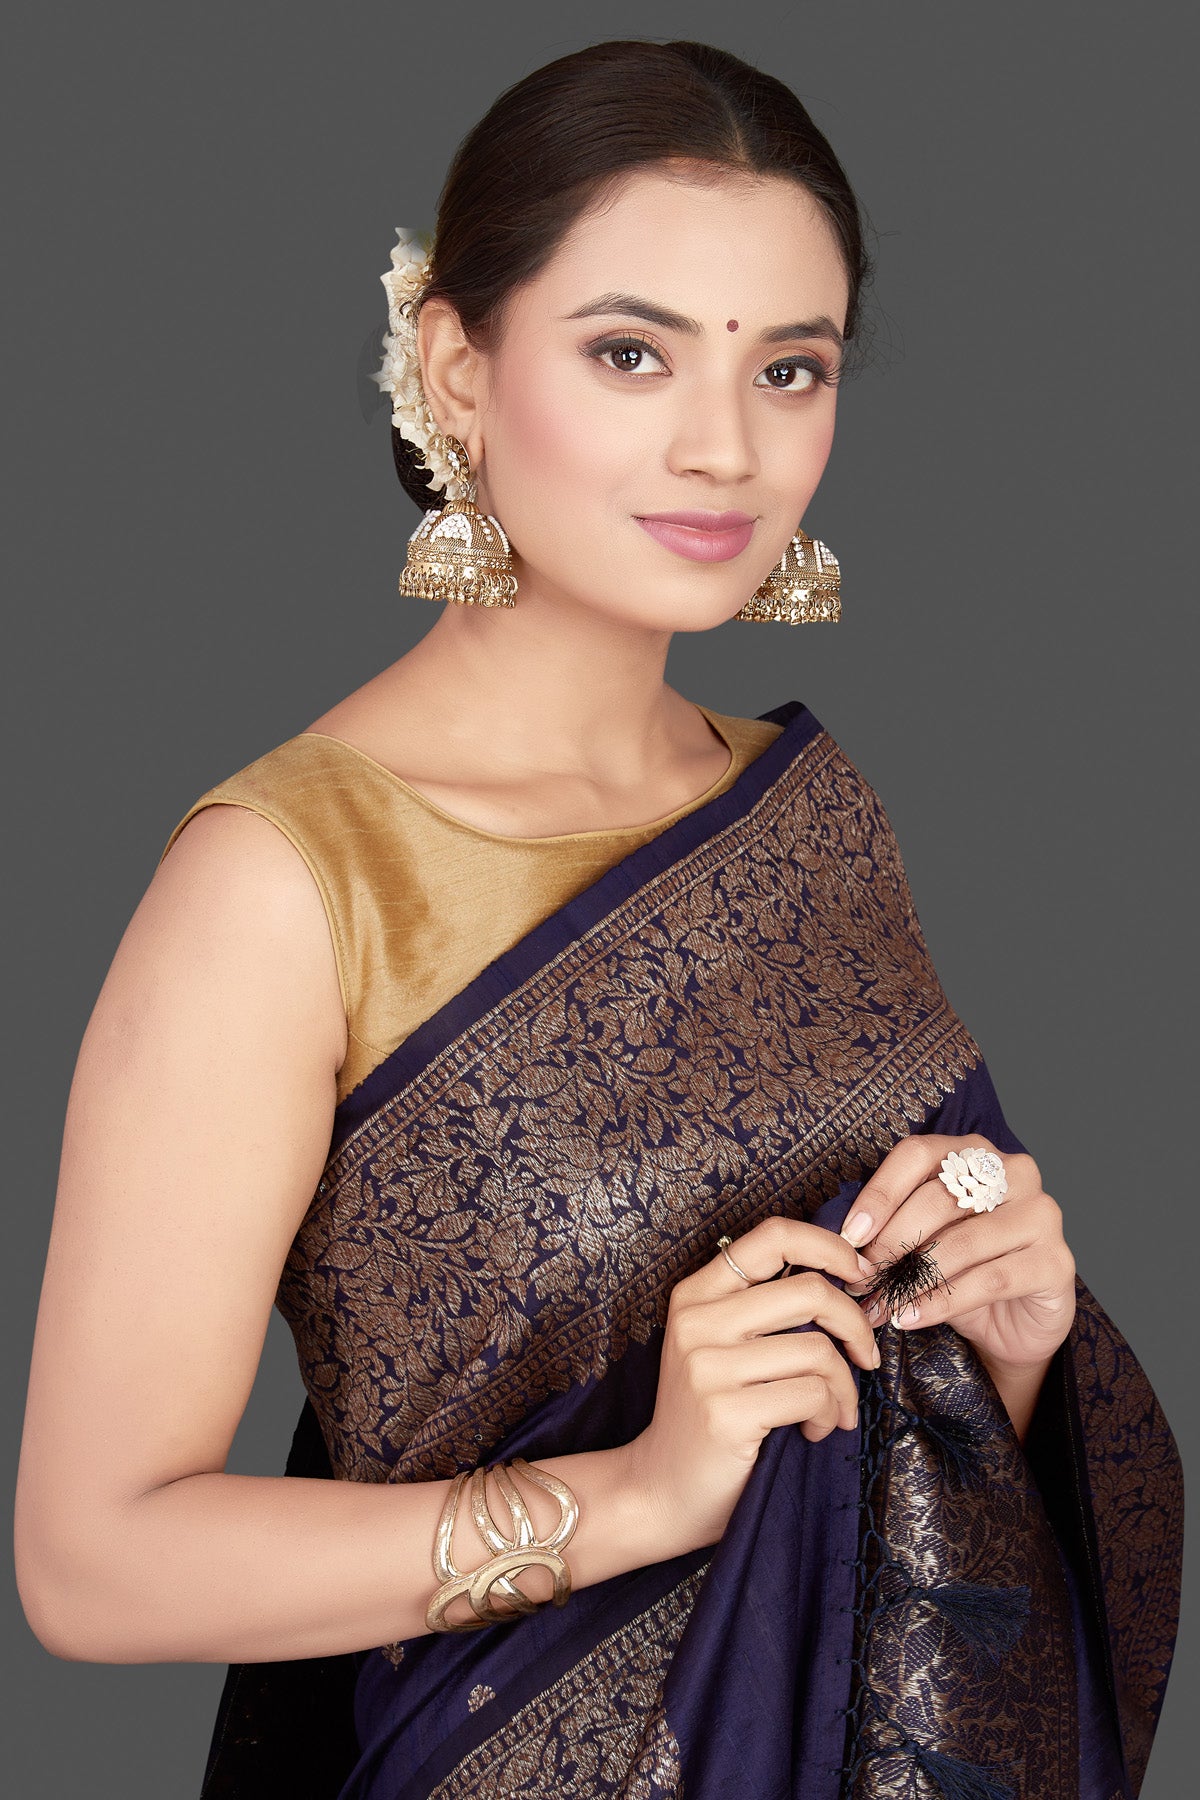 Buy beautiful navy tussar Banarasi saree online in USA with antique zari border. Go for stunning Indian designer sarees, georgette sarees, handwoven saris, embroidered sarees for festive occasions and weddings from Pure Elegance Indian clothing store in USA.-closeup